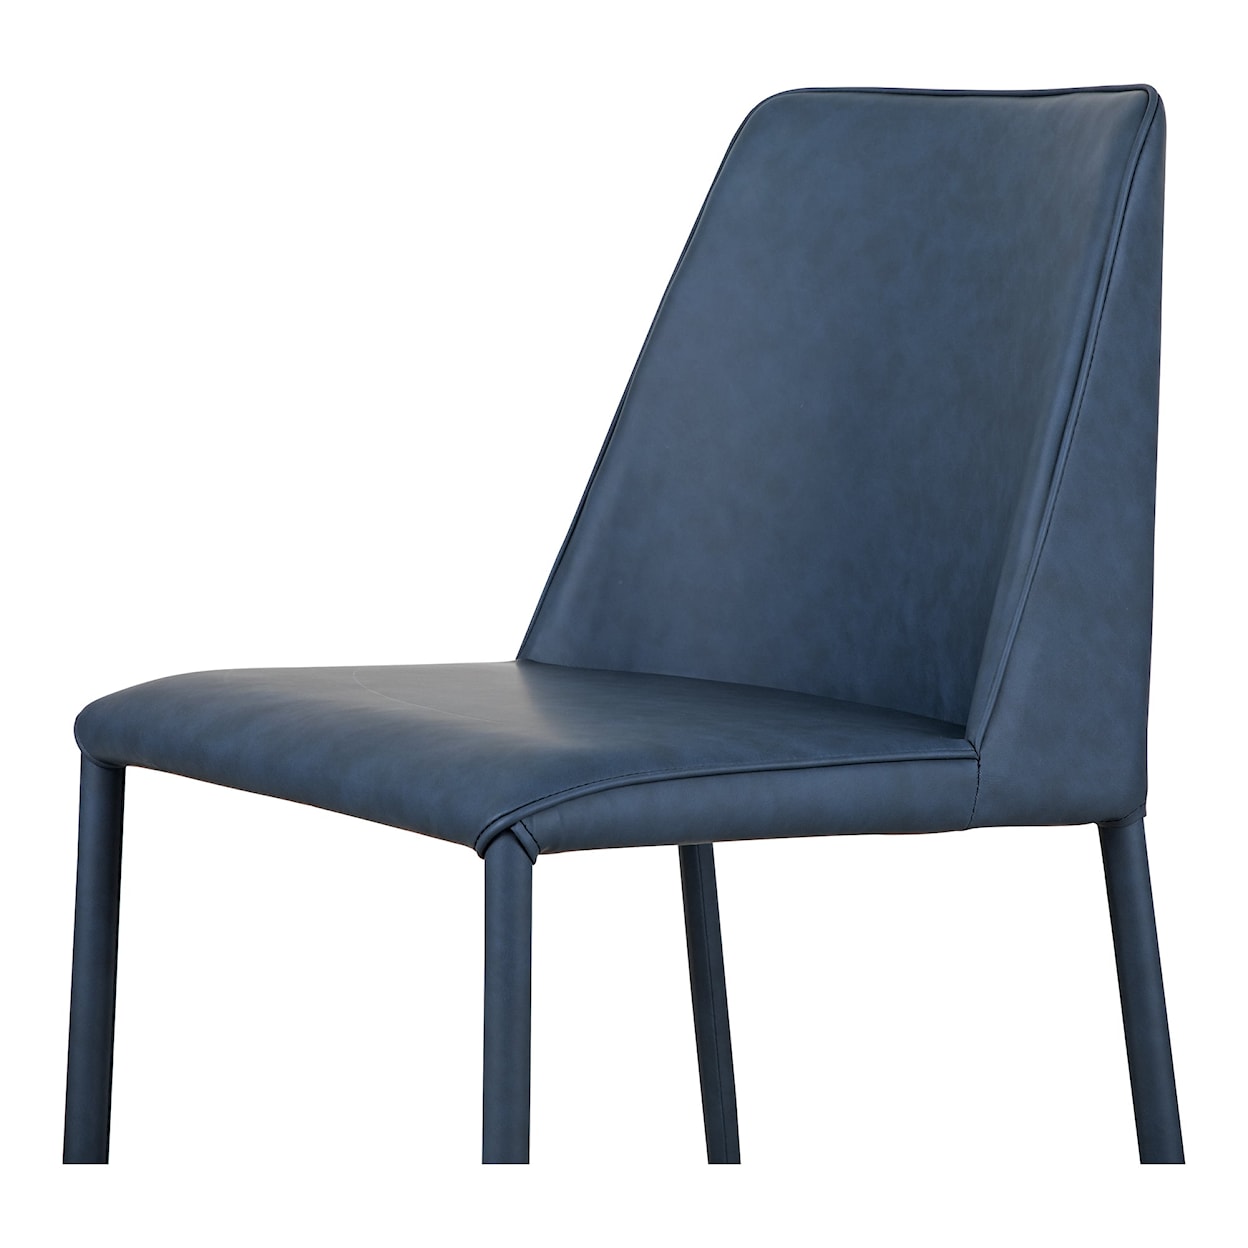 Moe's Home Collection Nora Ocean Cavern Grey Vegan Leather Dining Chair